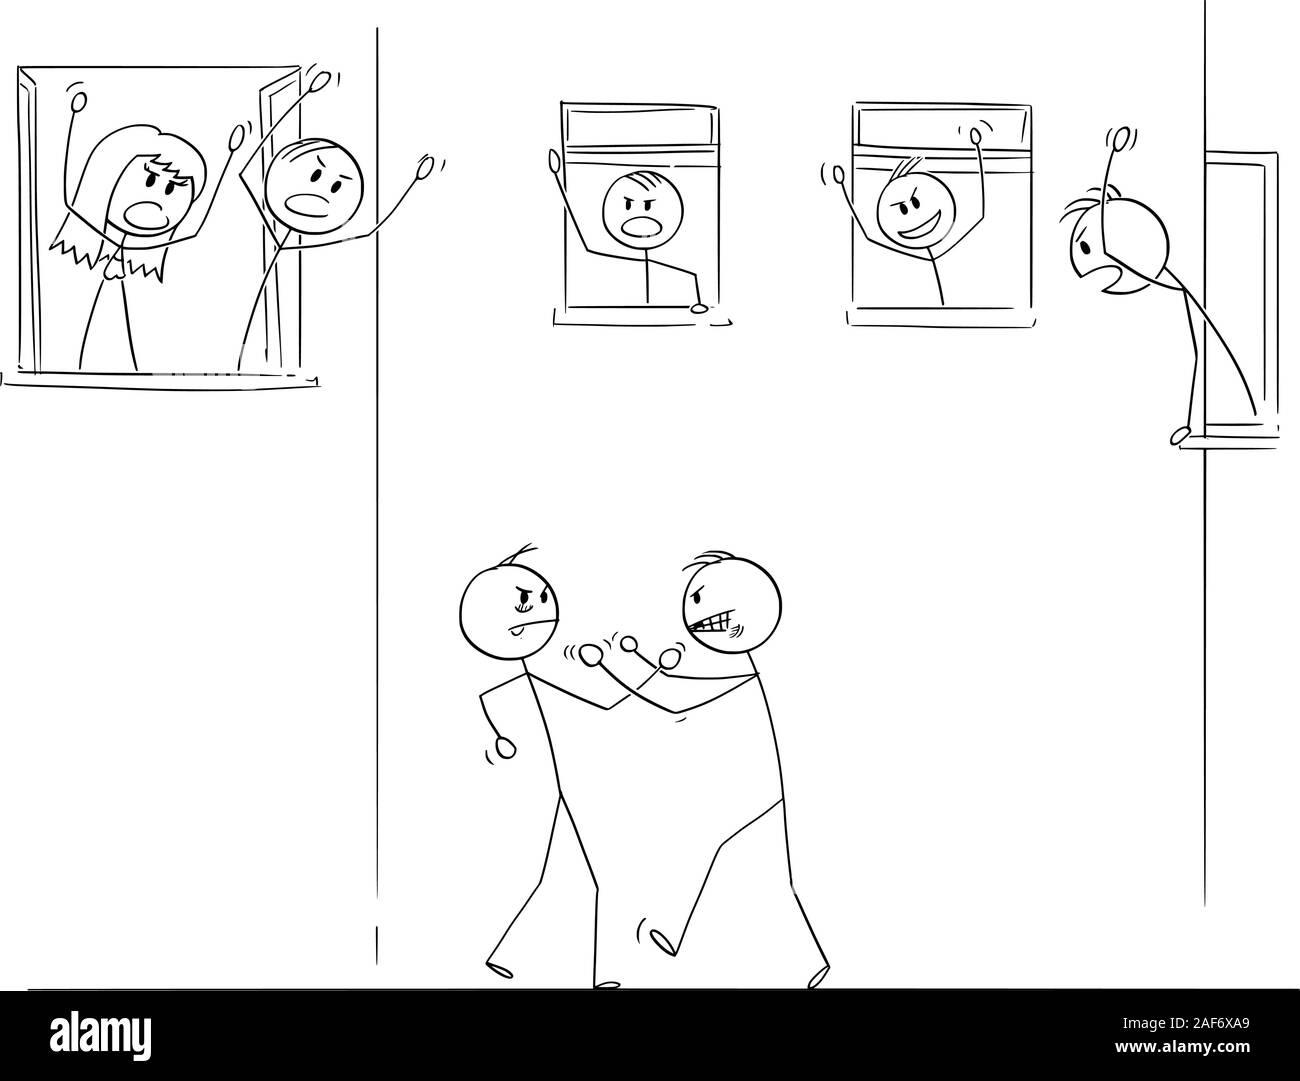 Vector cartoon stick figure drawing conceptual illustration of two angry men fighting or fistfighting on the street, people living in houses around are cheering from windows. Stock Vector